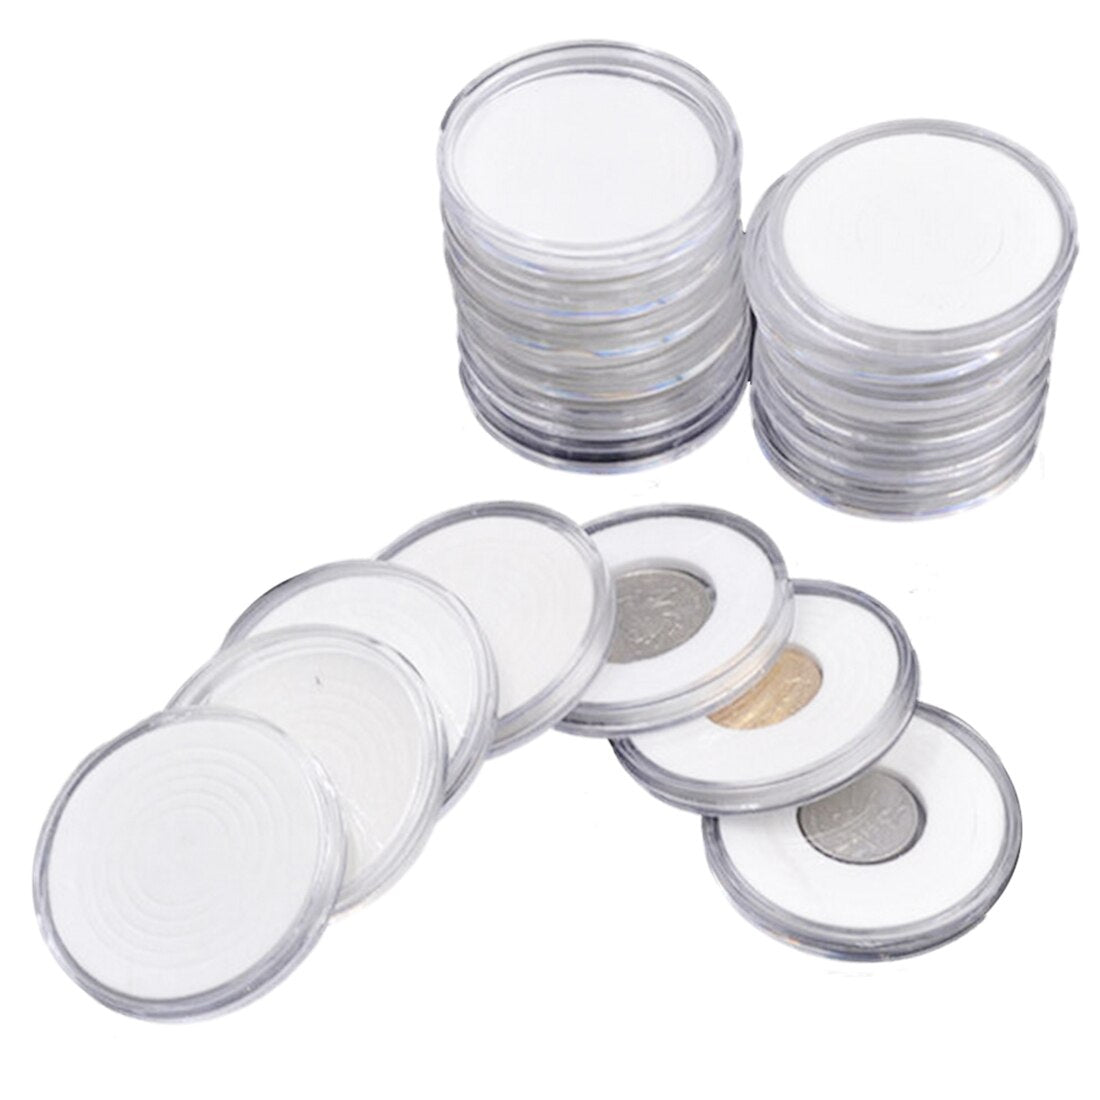 20 pcs 46mm Coin Cases Holder Applied Clear Round Storage Box - ebowsos